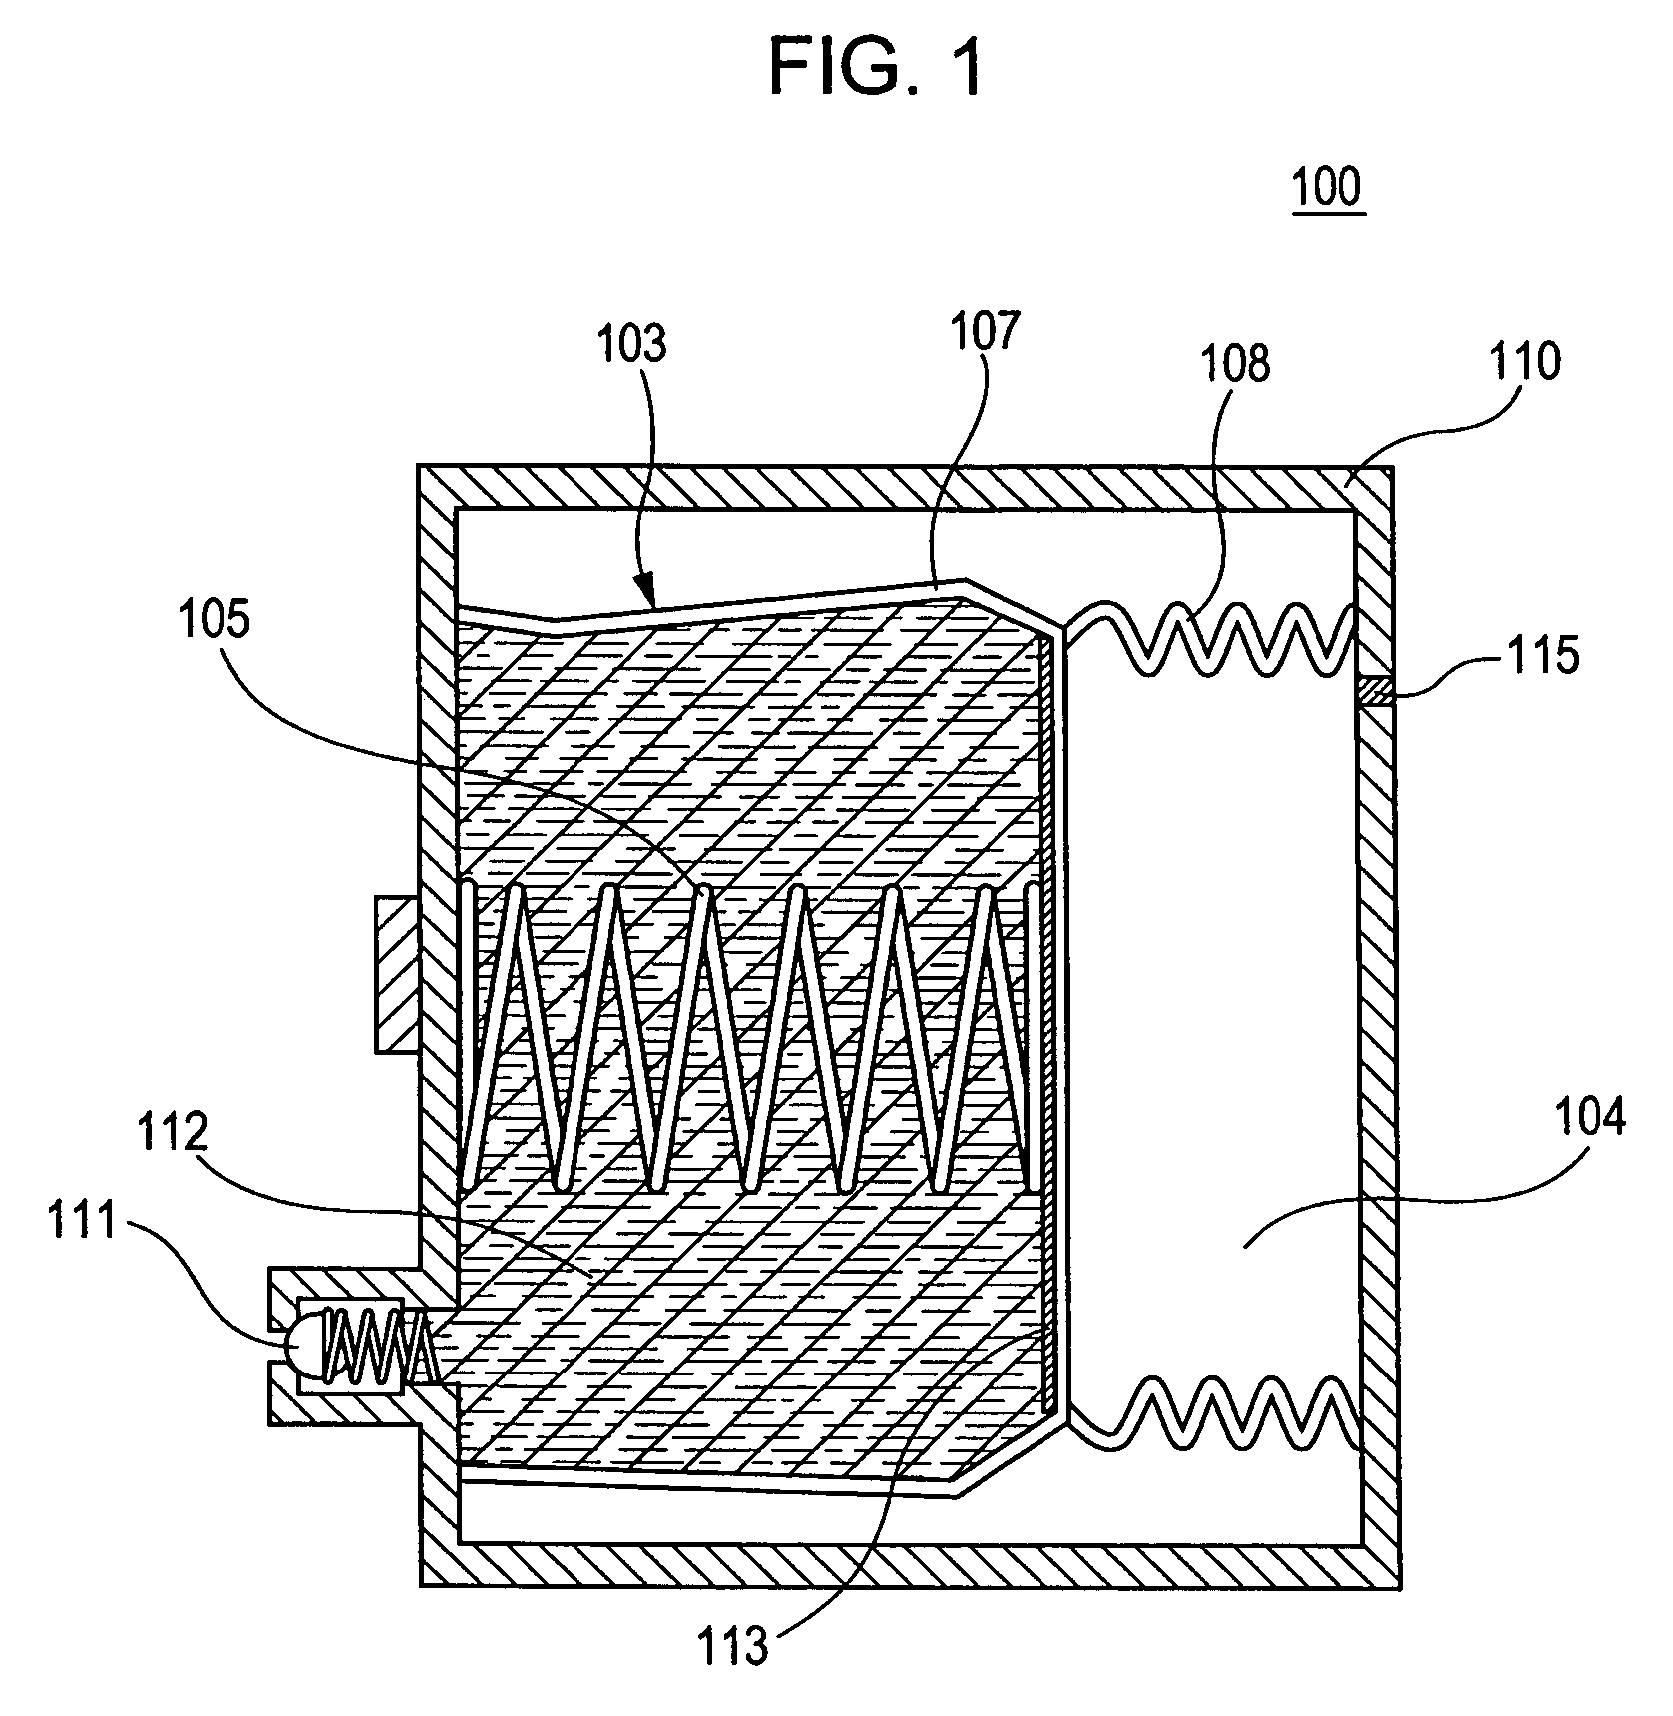 Liquid storage container and liquid ejection recording apparatus having the container mounted thereon